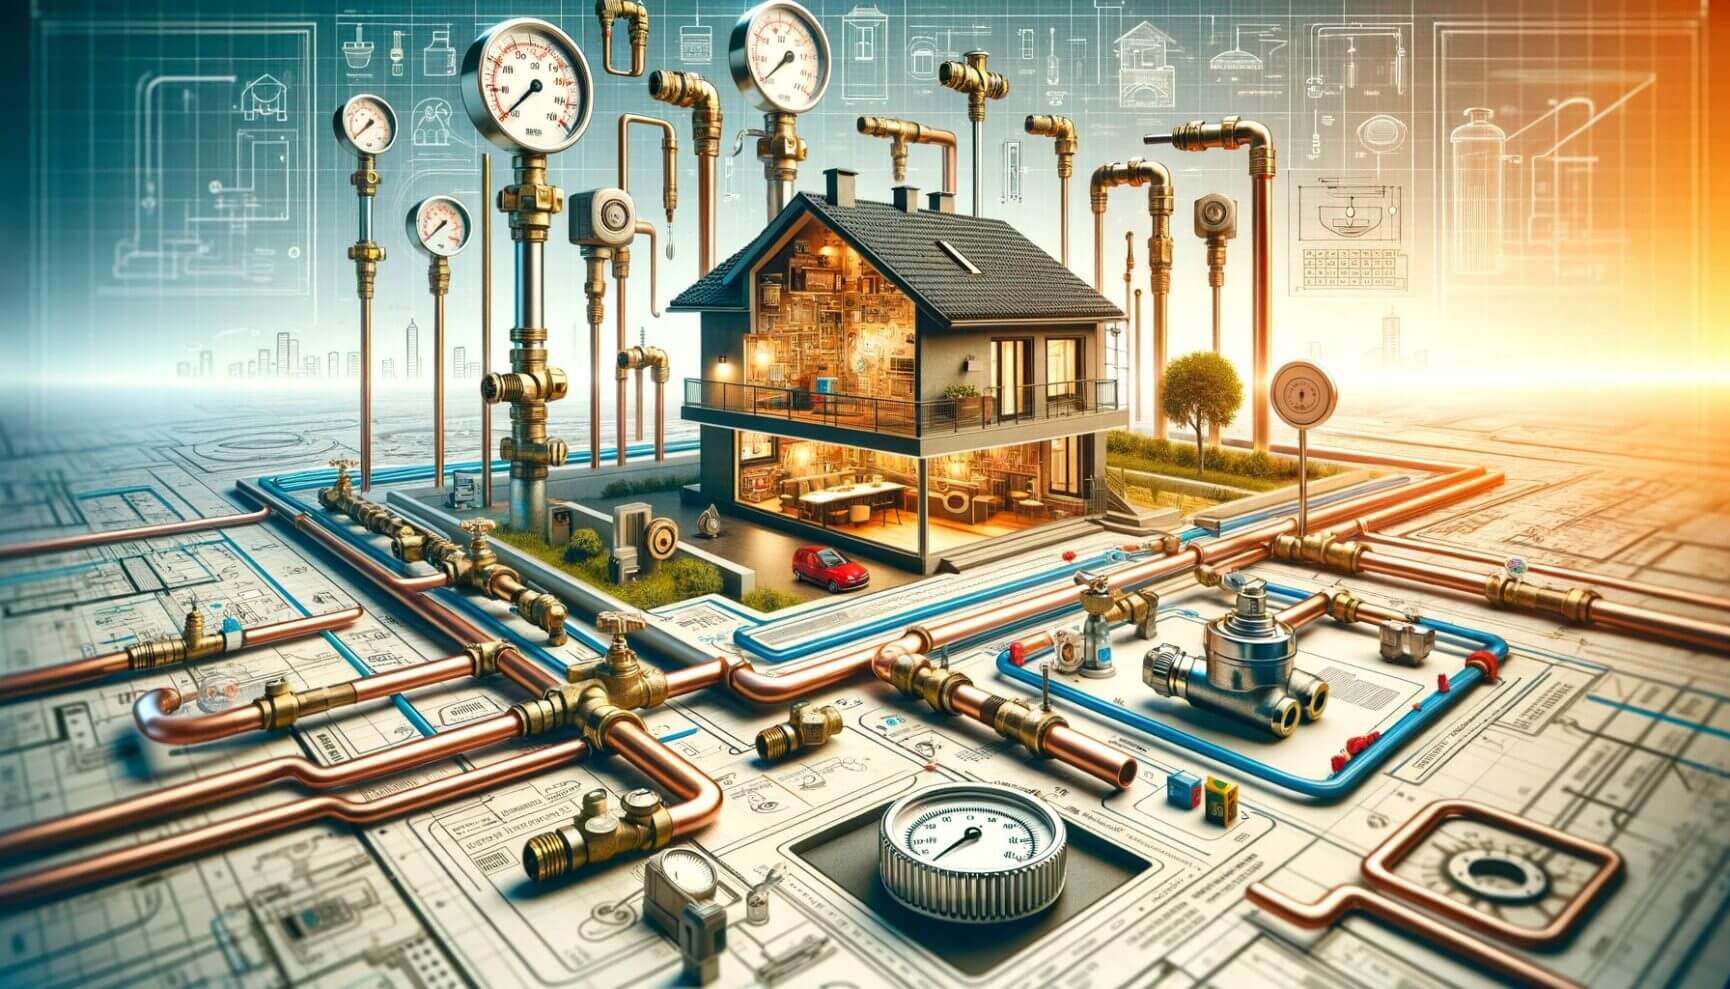 A house is surrounded by pipes and clocks.